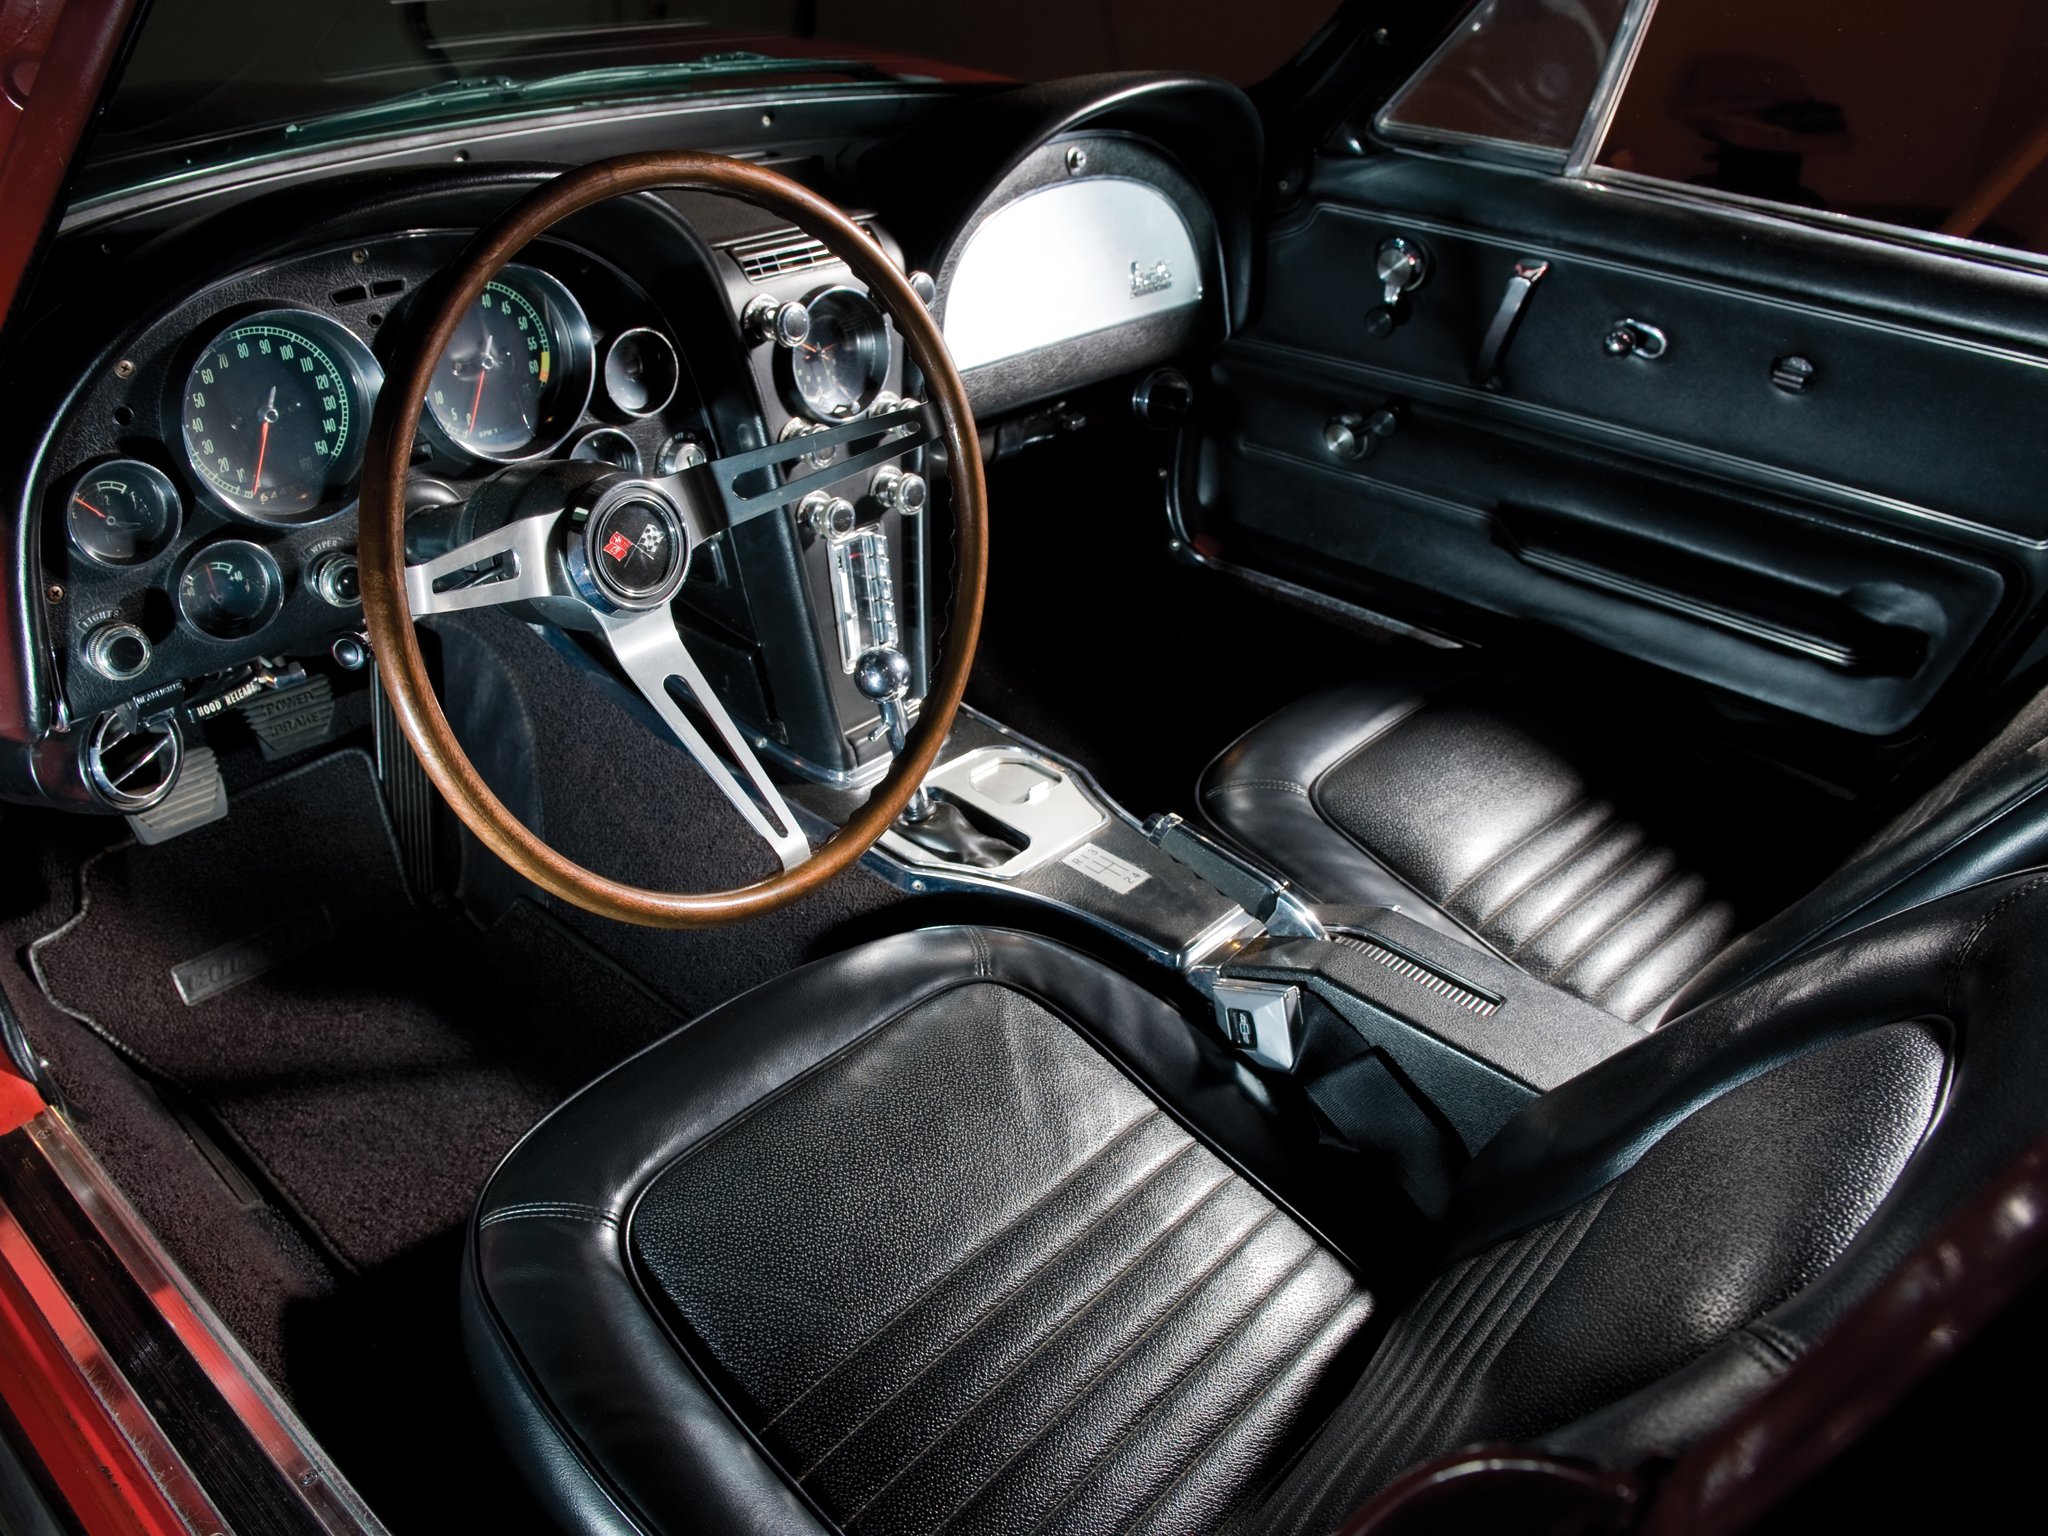 The 1967 Sting Ray's interior